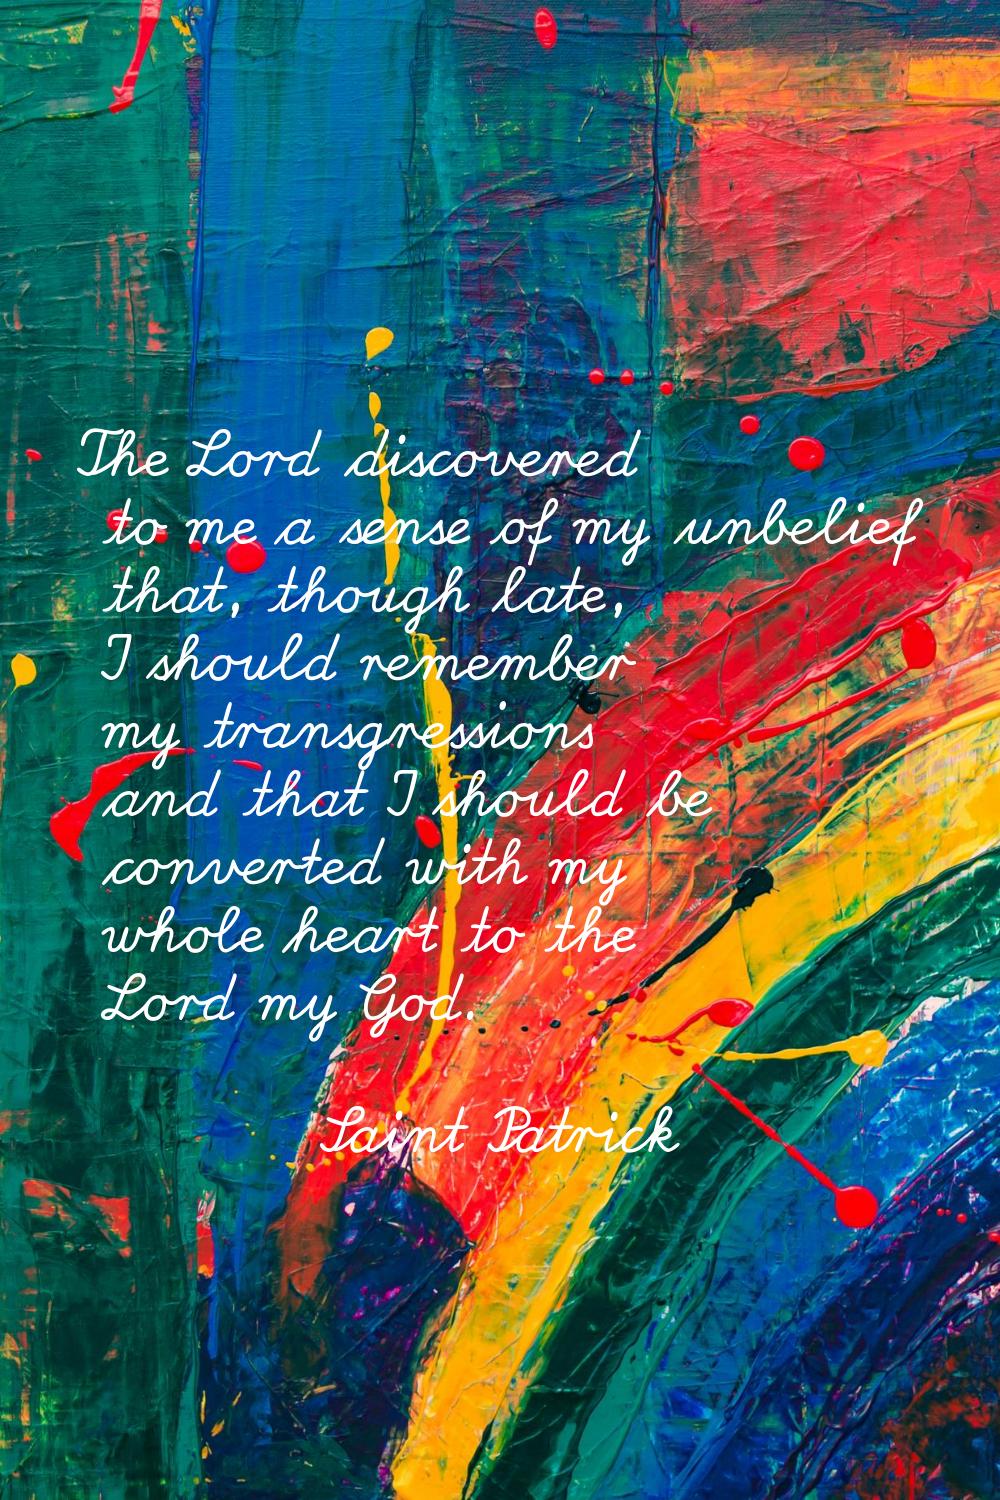 The Lord discovered to me a sense of my unbelief that, though late, I should remember my transgress